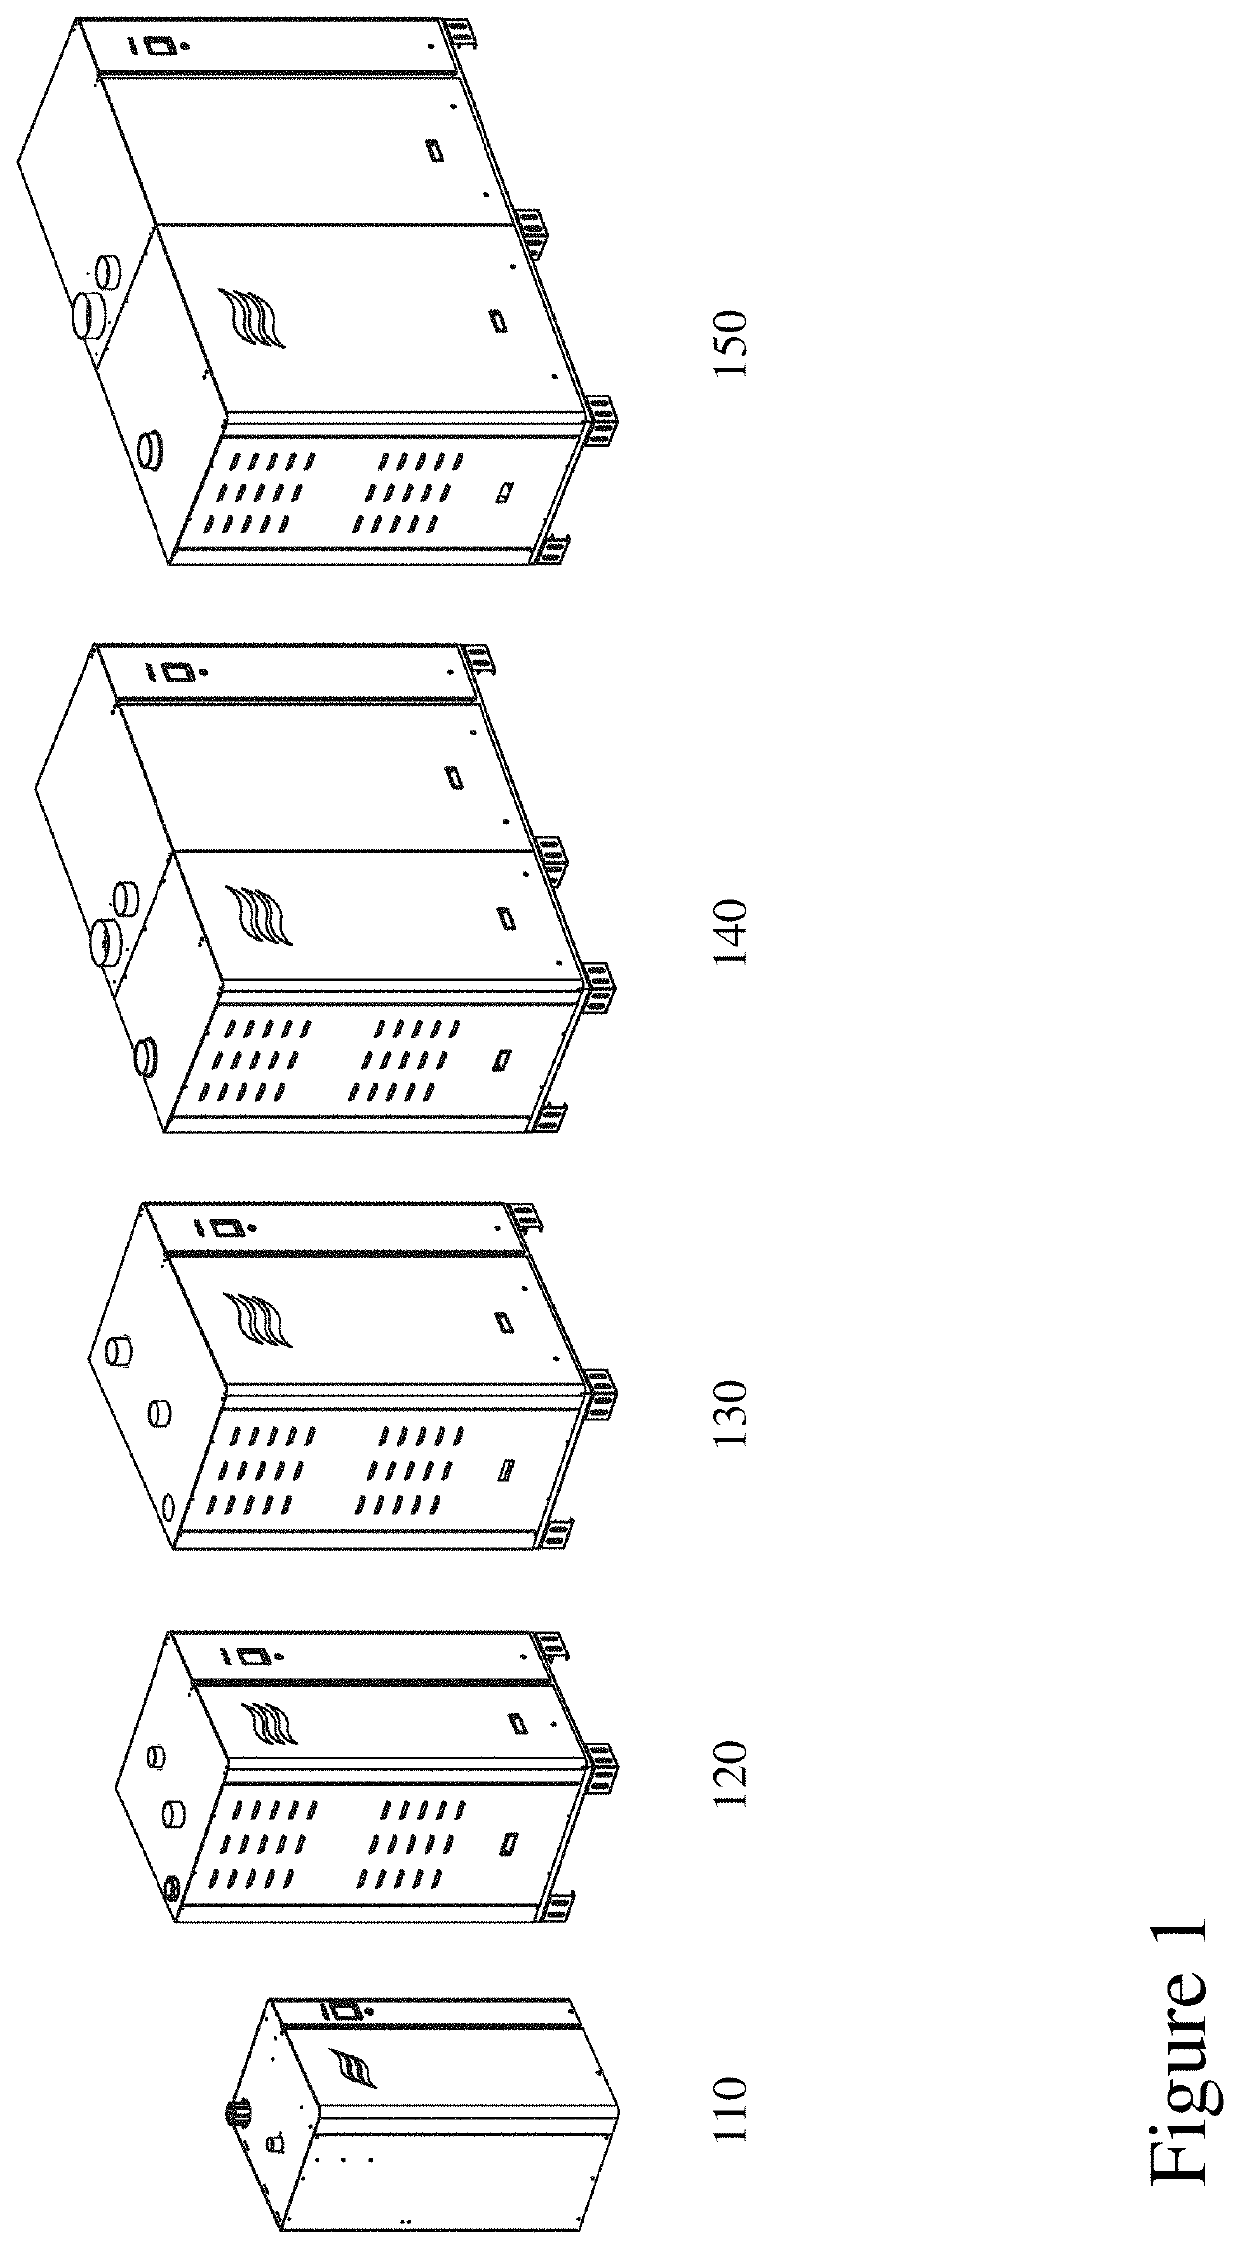 Dual-stage humidifier methods and systems